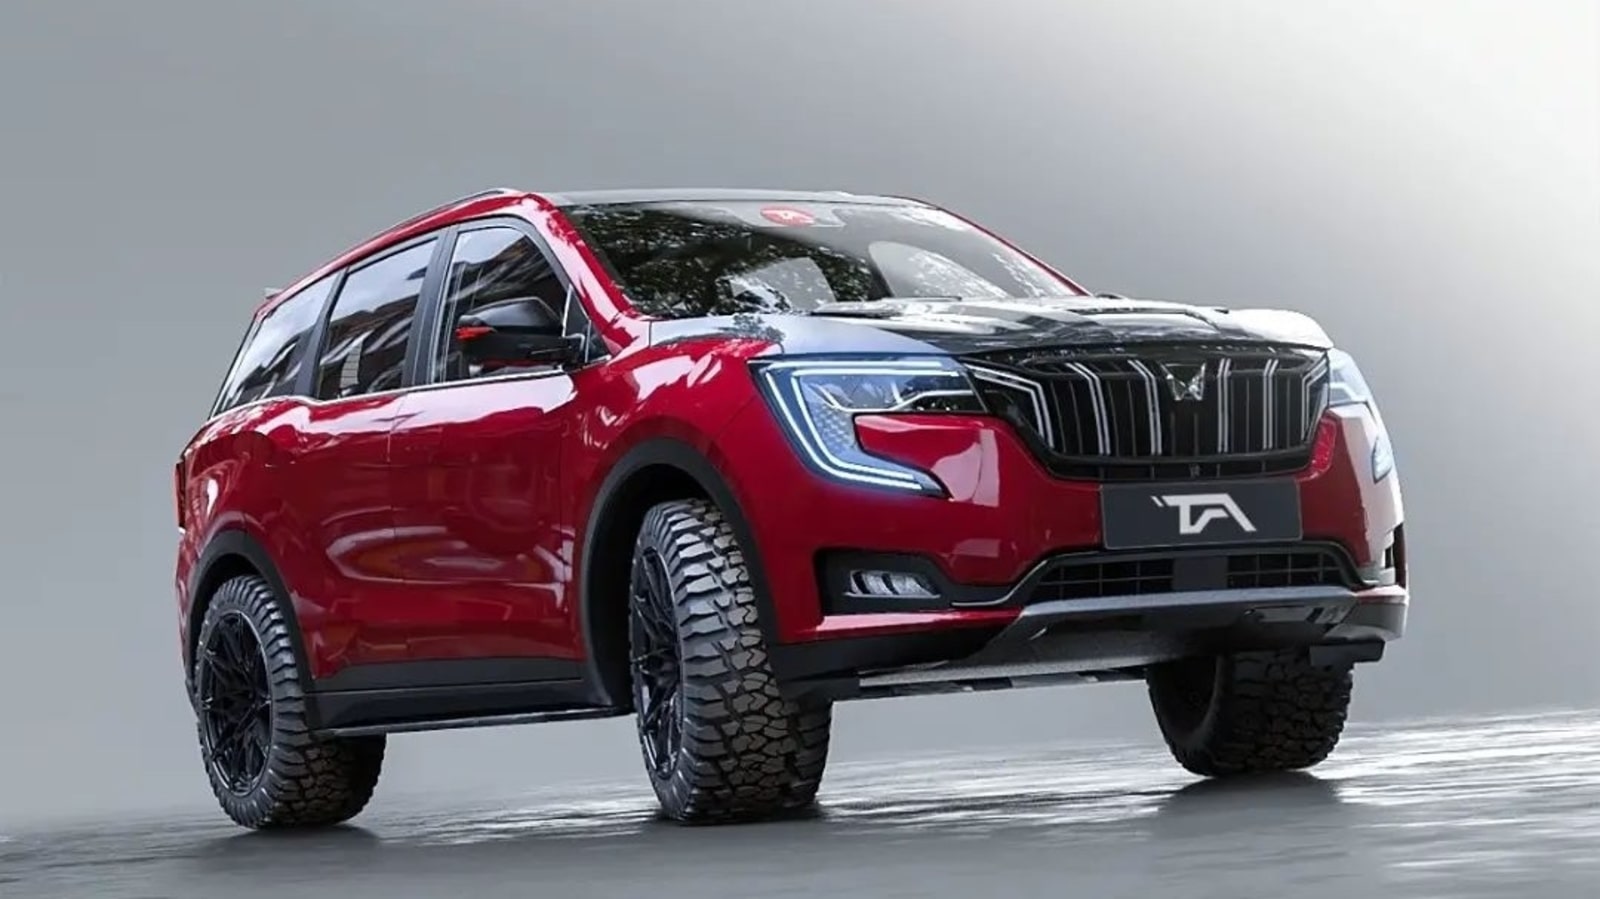 Mahindra XUV700 Digitally Reimagined In A Sporty Off-Road Avatar